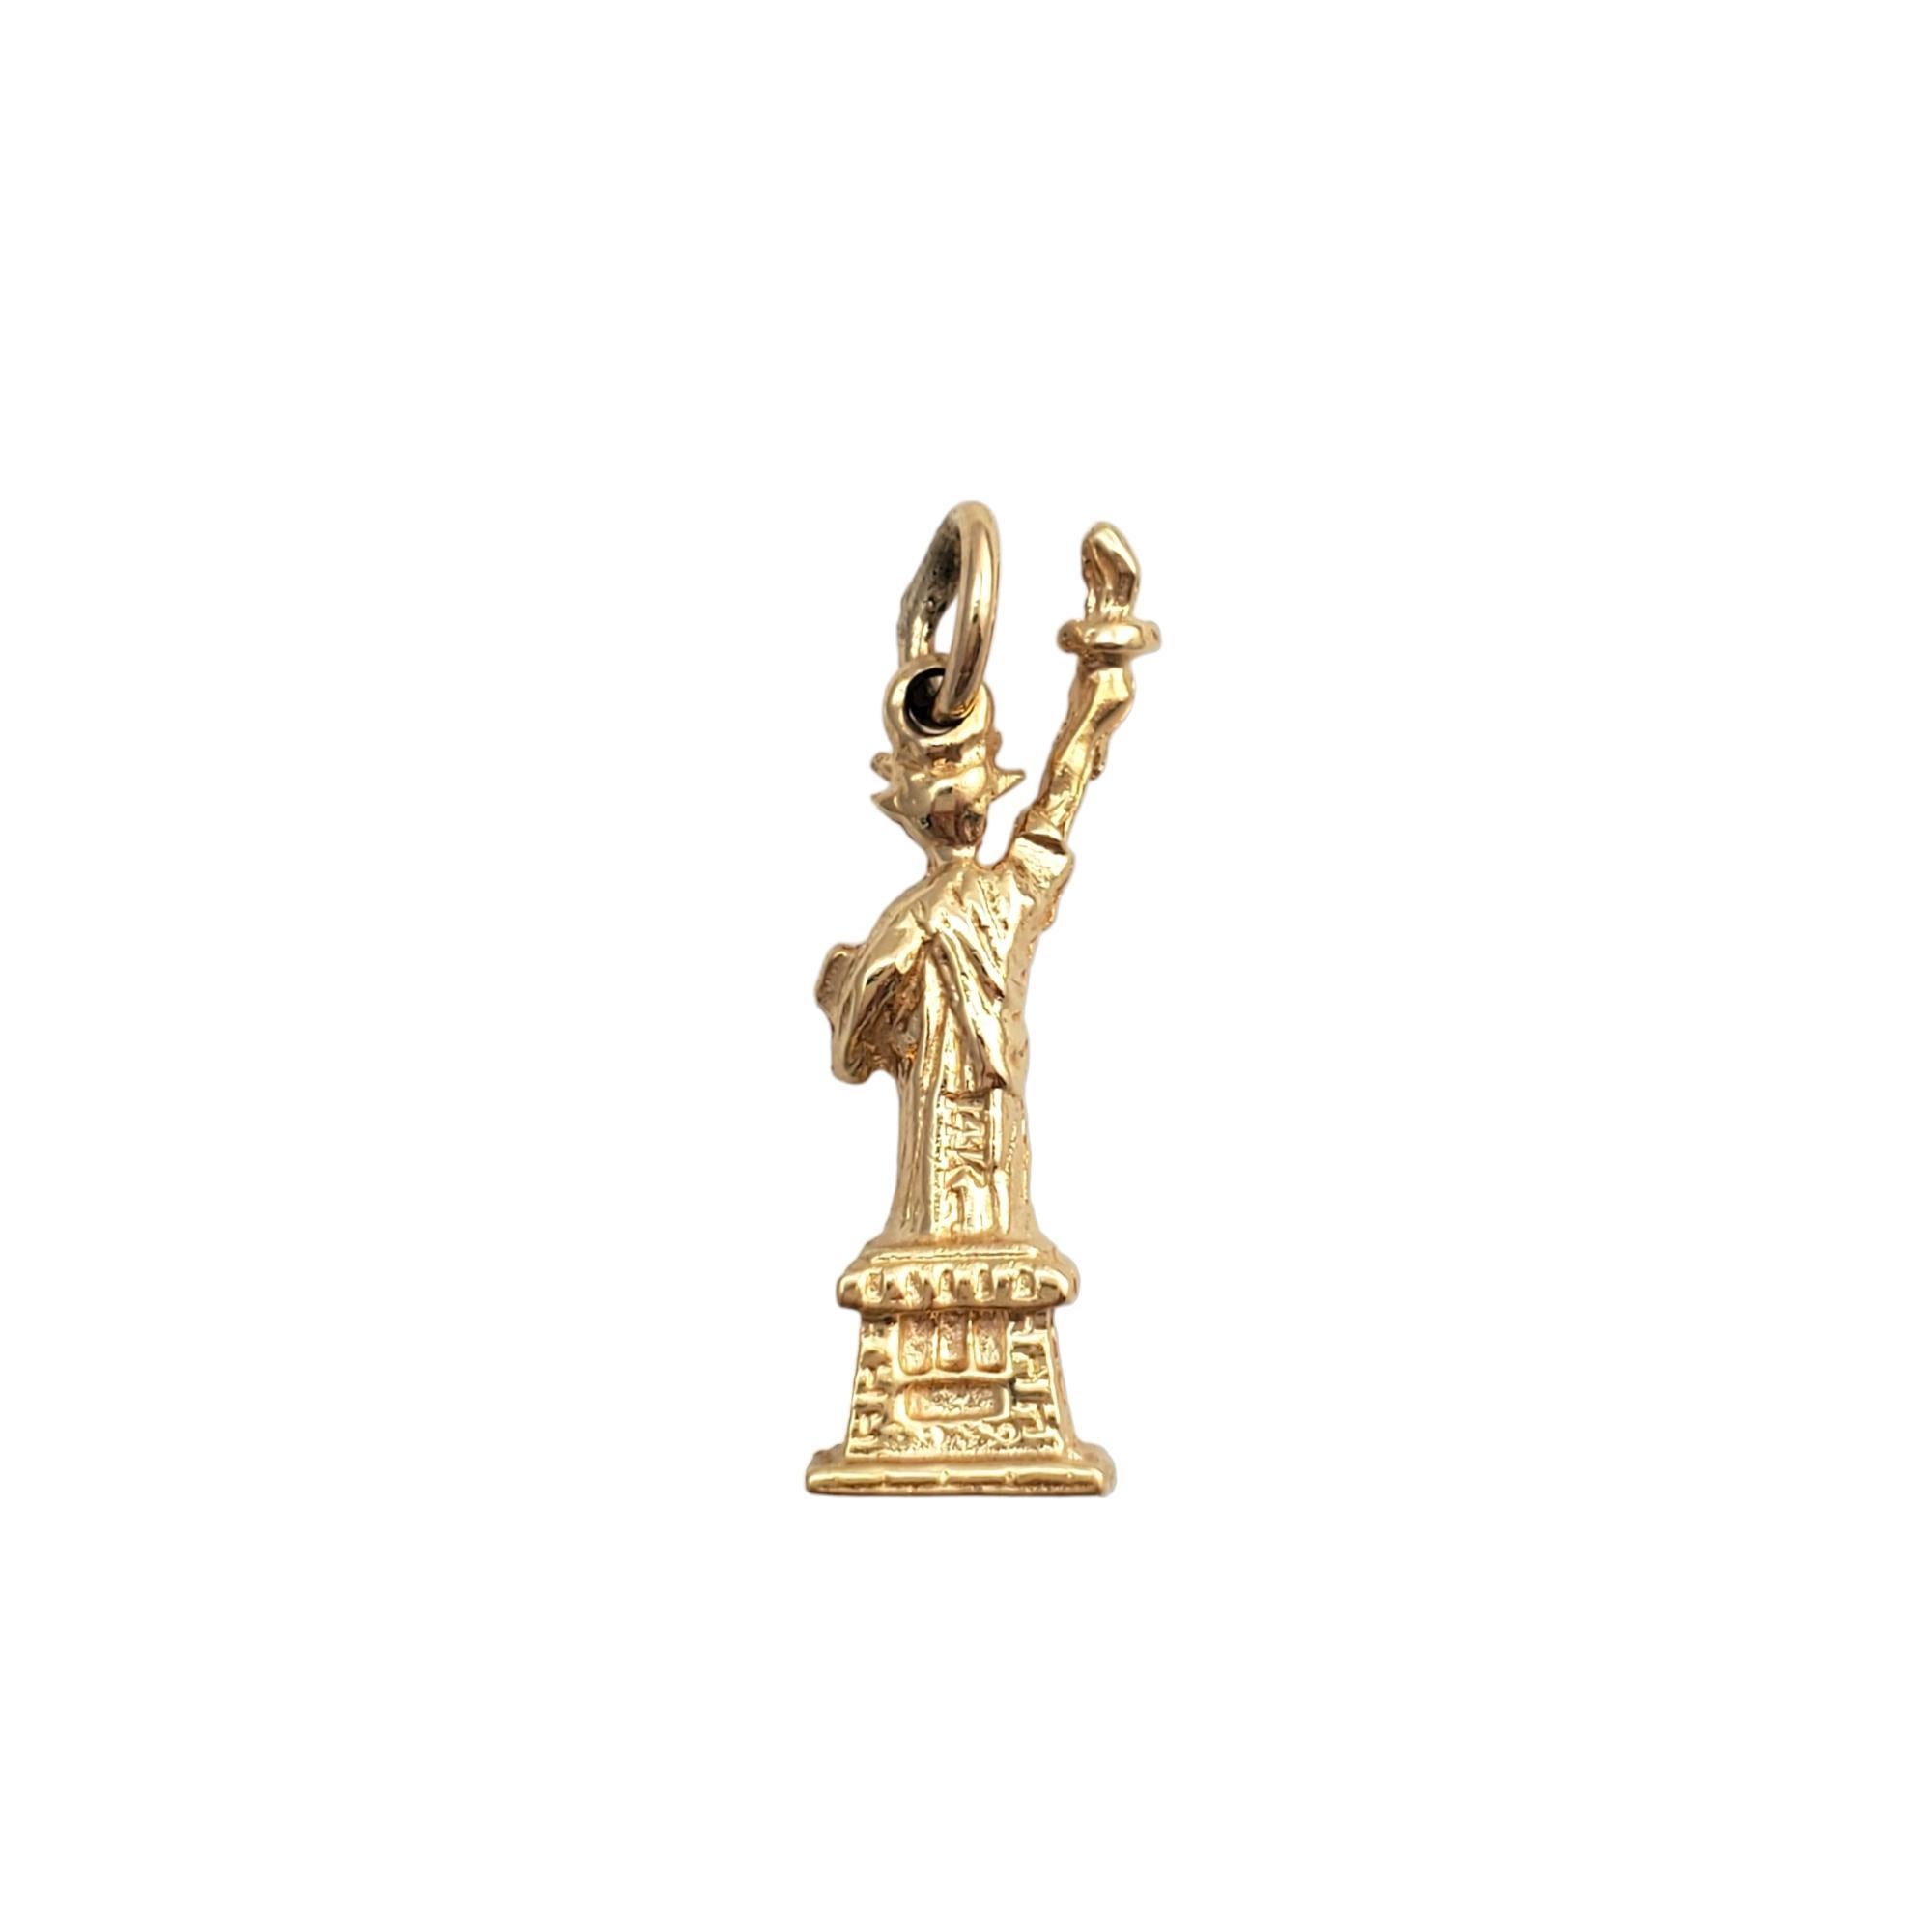 Vintage 14K yellow gold Statue of Liberty charm - 

This miniature masterpiece capture's the iconic symbol of freedom in meticulously detailed 14K yellow gold. 

Weight: 3.3g/2.1dwt

Size: 25.6mm X 6.1mm

Stamped: 14K

Very good condition.

Will